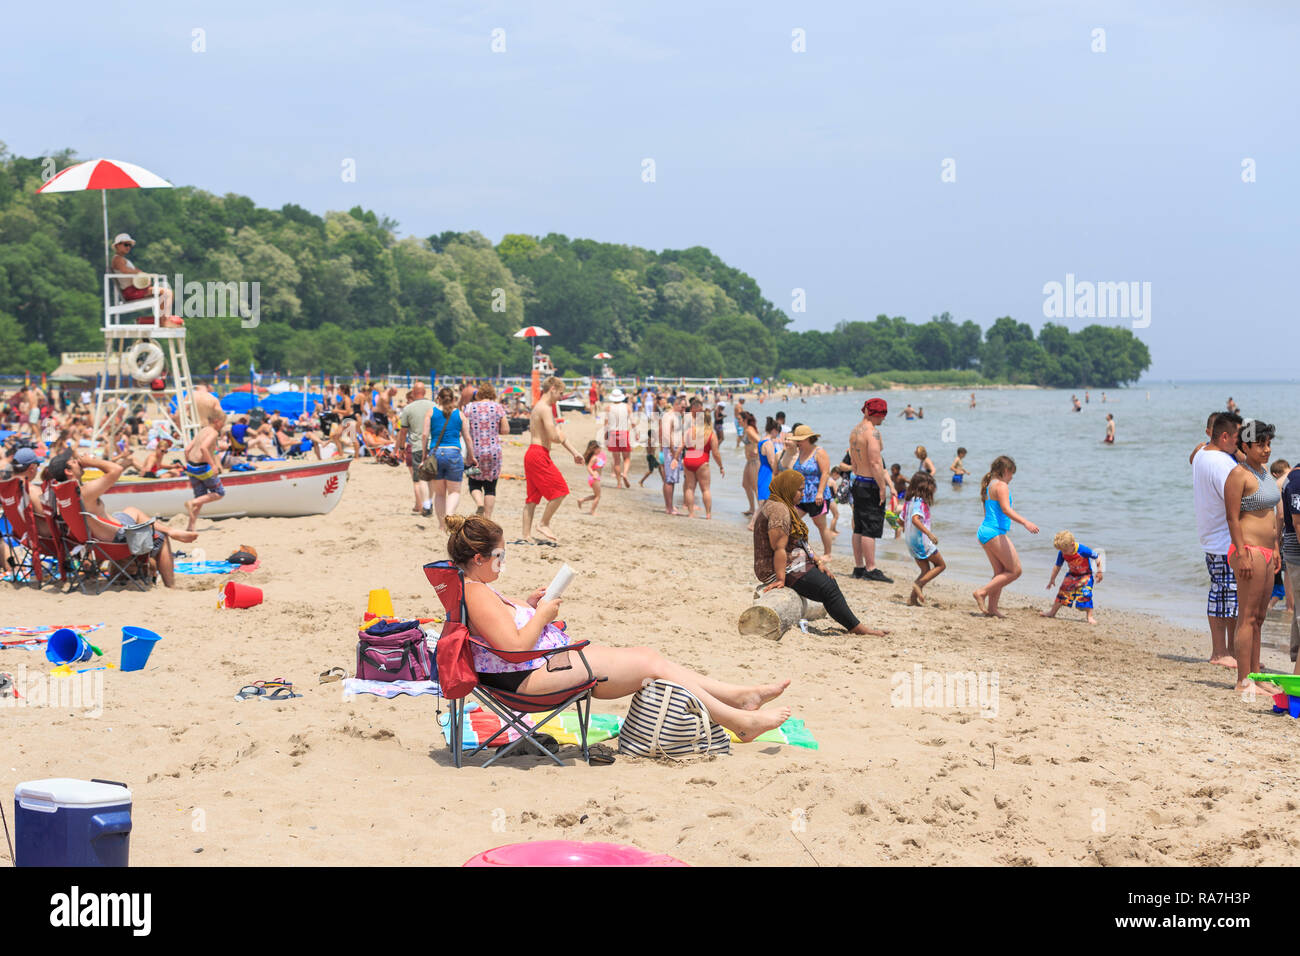 crowds of people fill a beach on a hot summer day Stock Photo